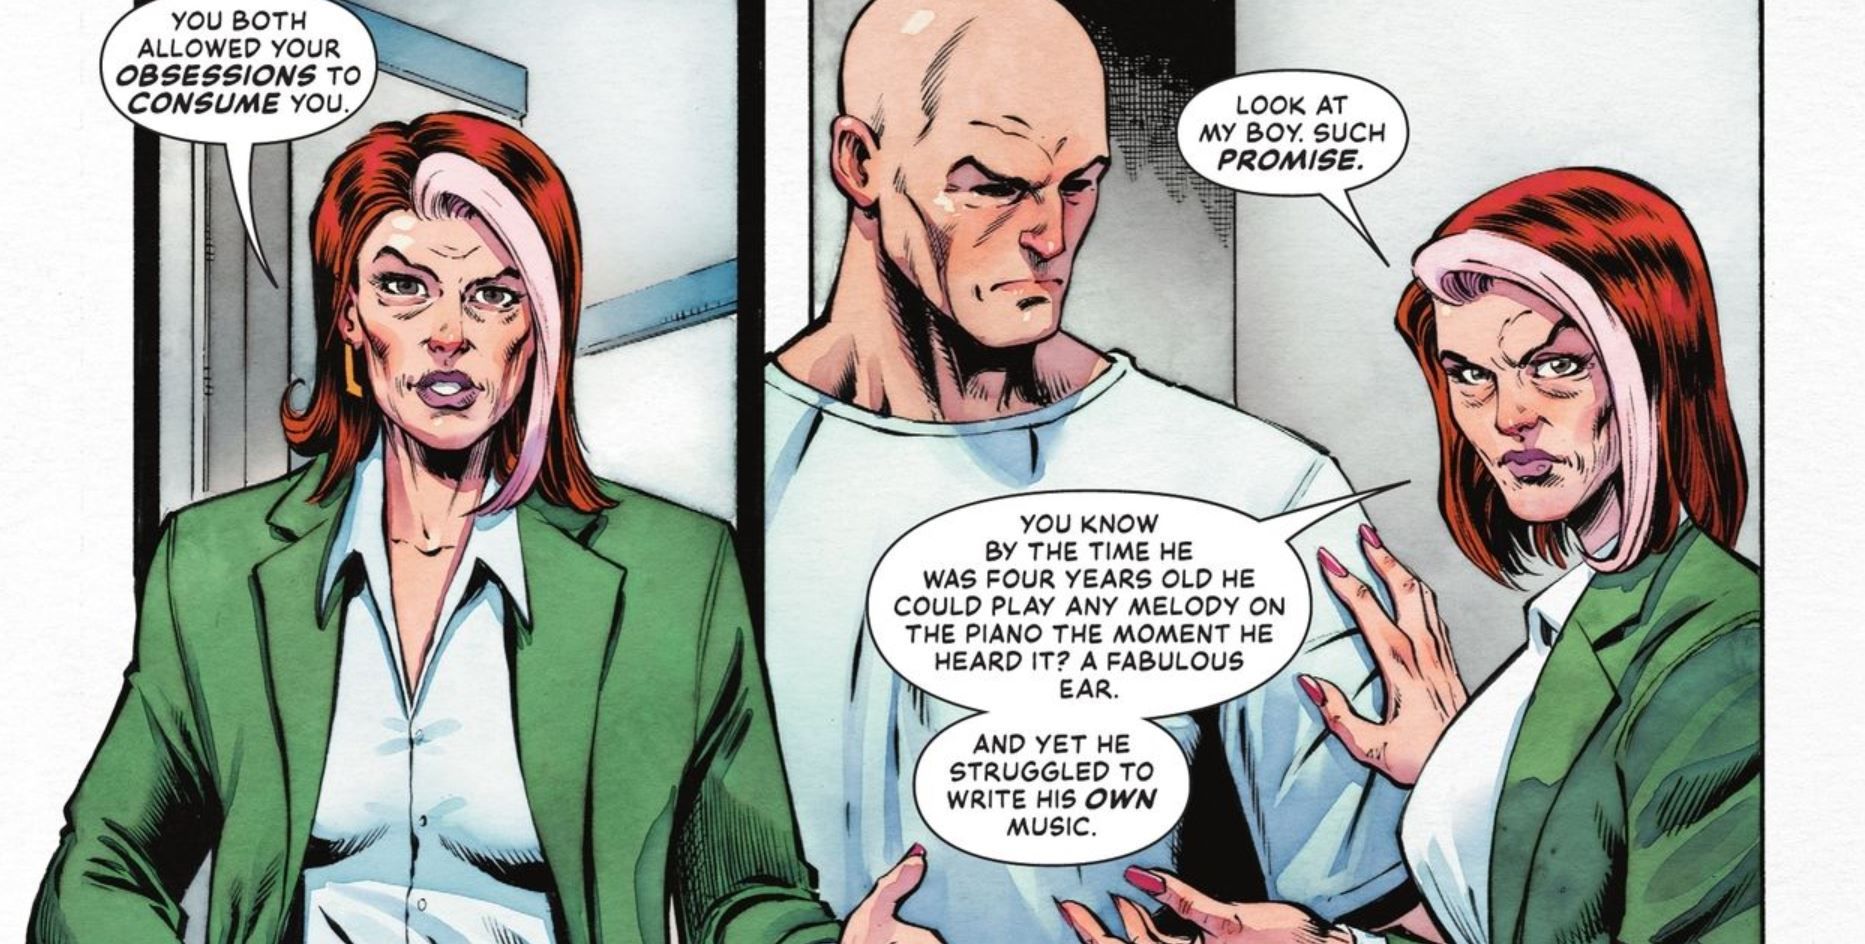 “Look At My Boy”: The Return of Lex Luthor’s Long-Lost Family Just Redefined His Character